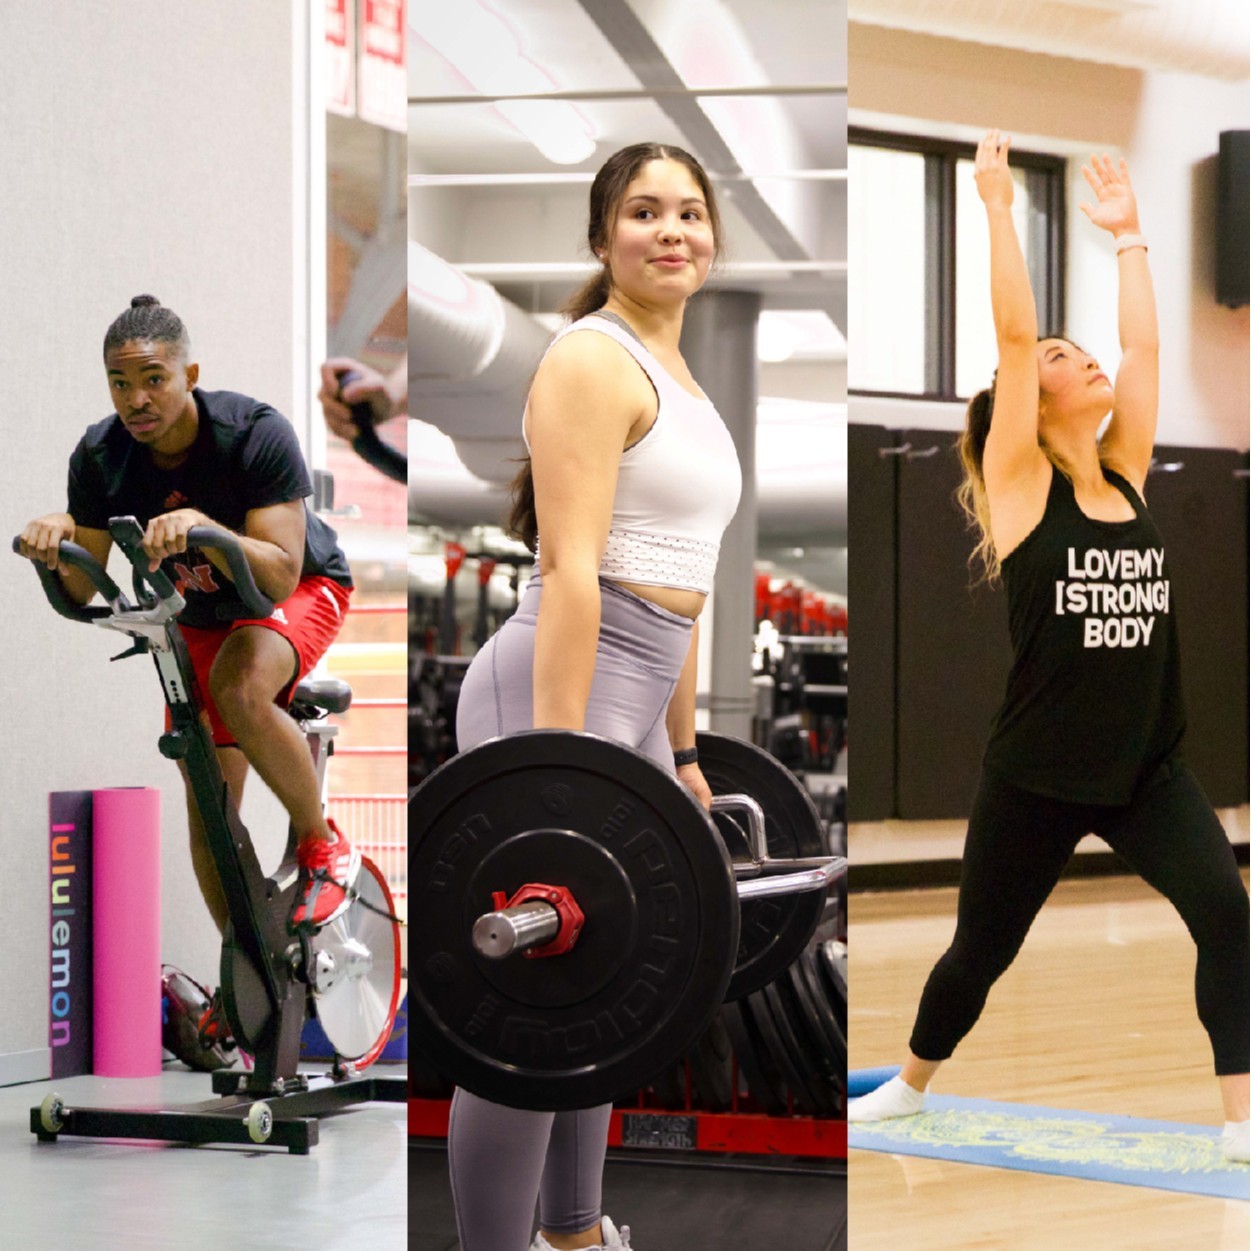 Group fitness classes are offered at Campus Rec Center (city) and Rec & Wellness Center (east).